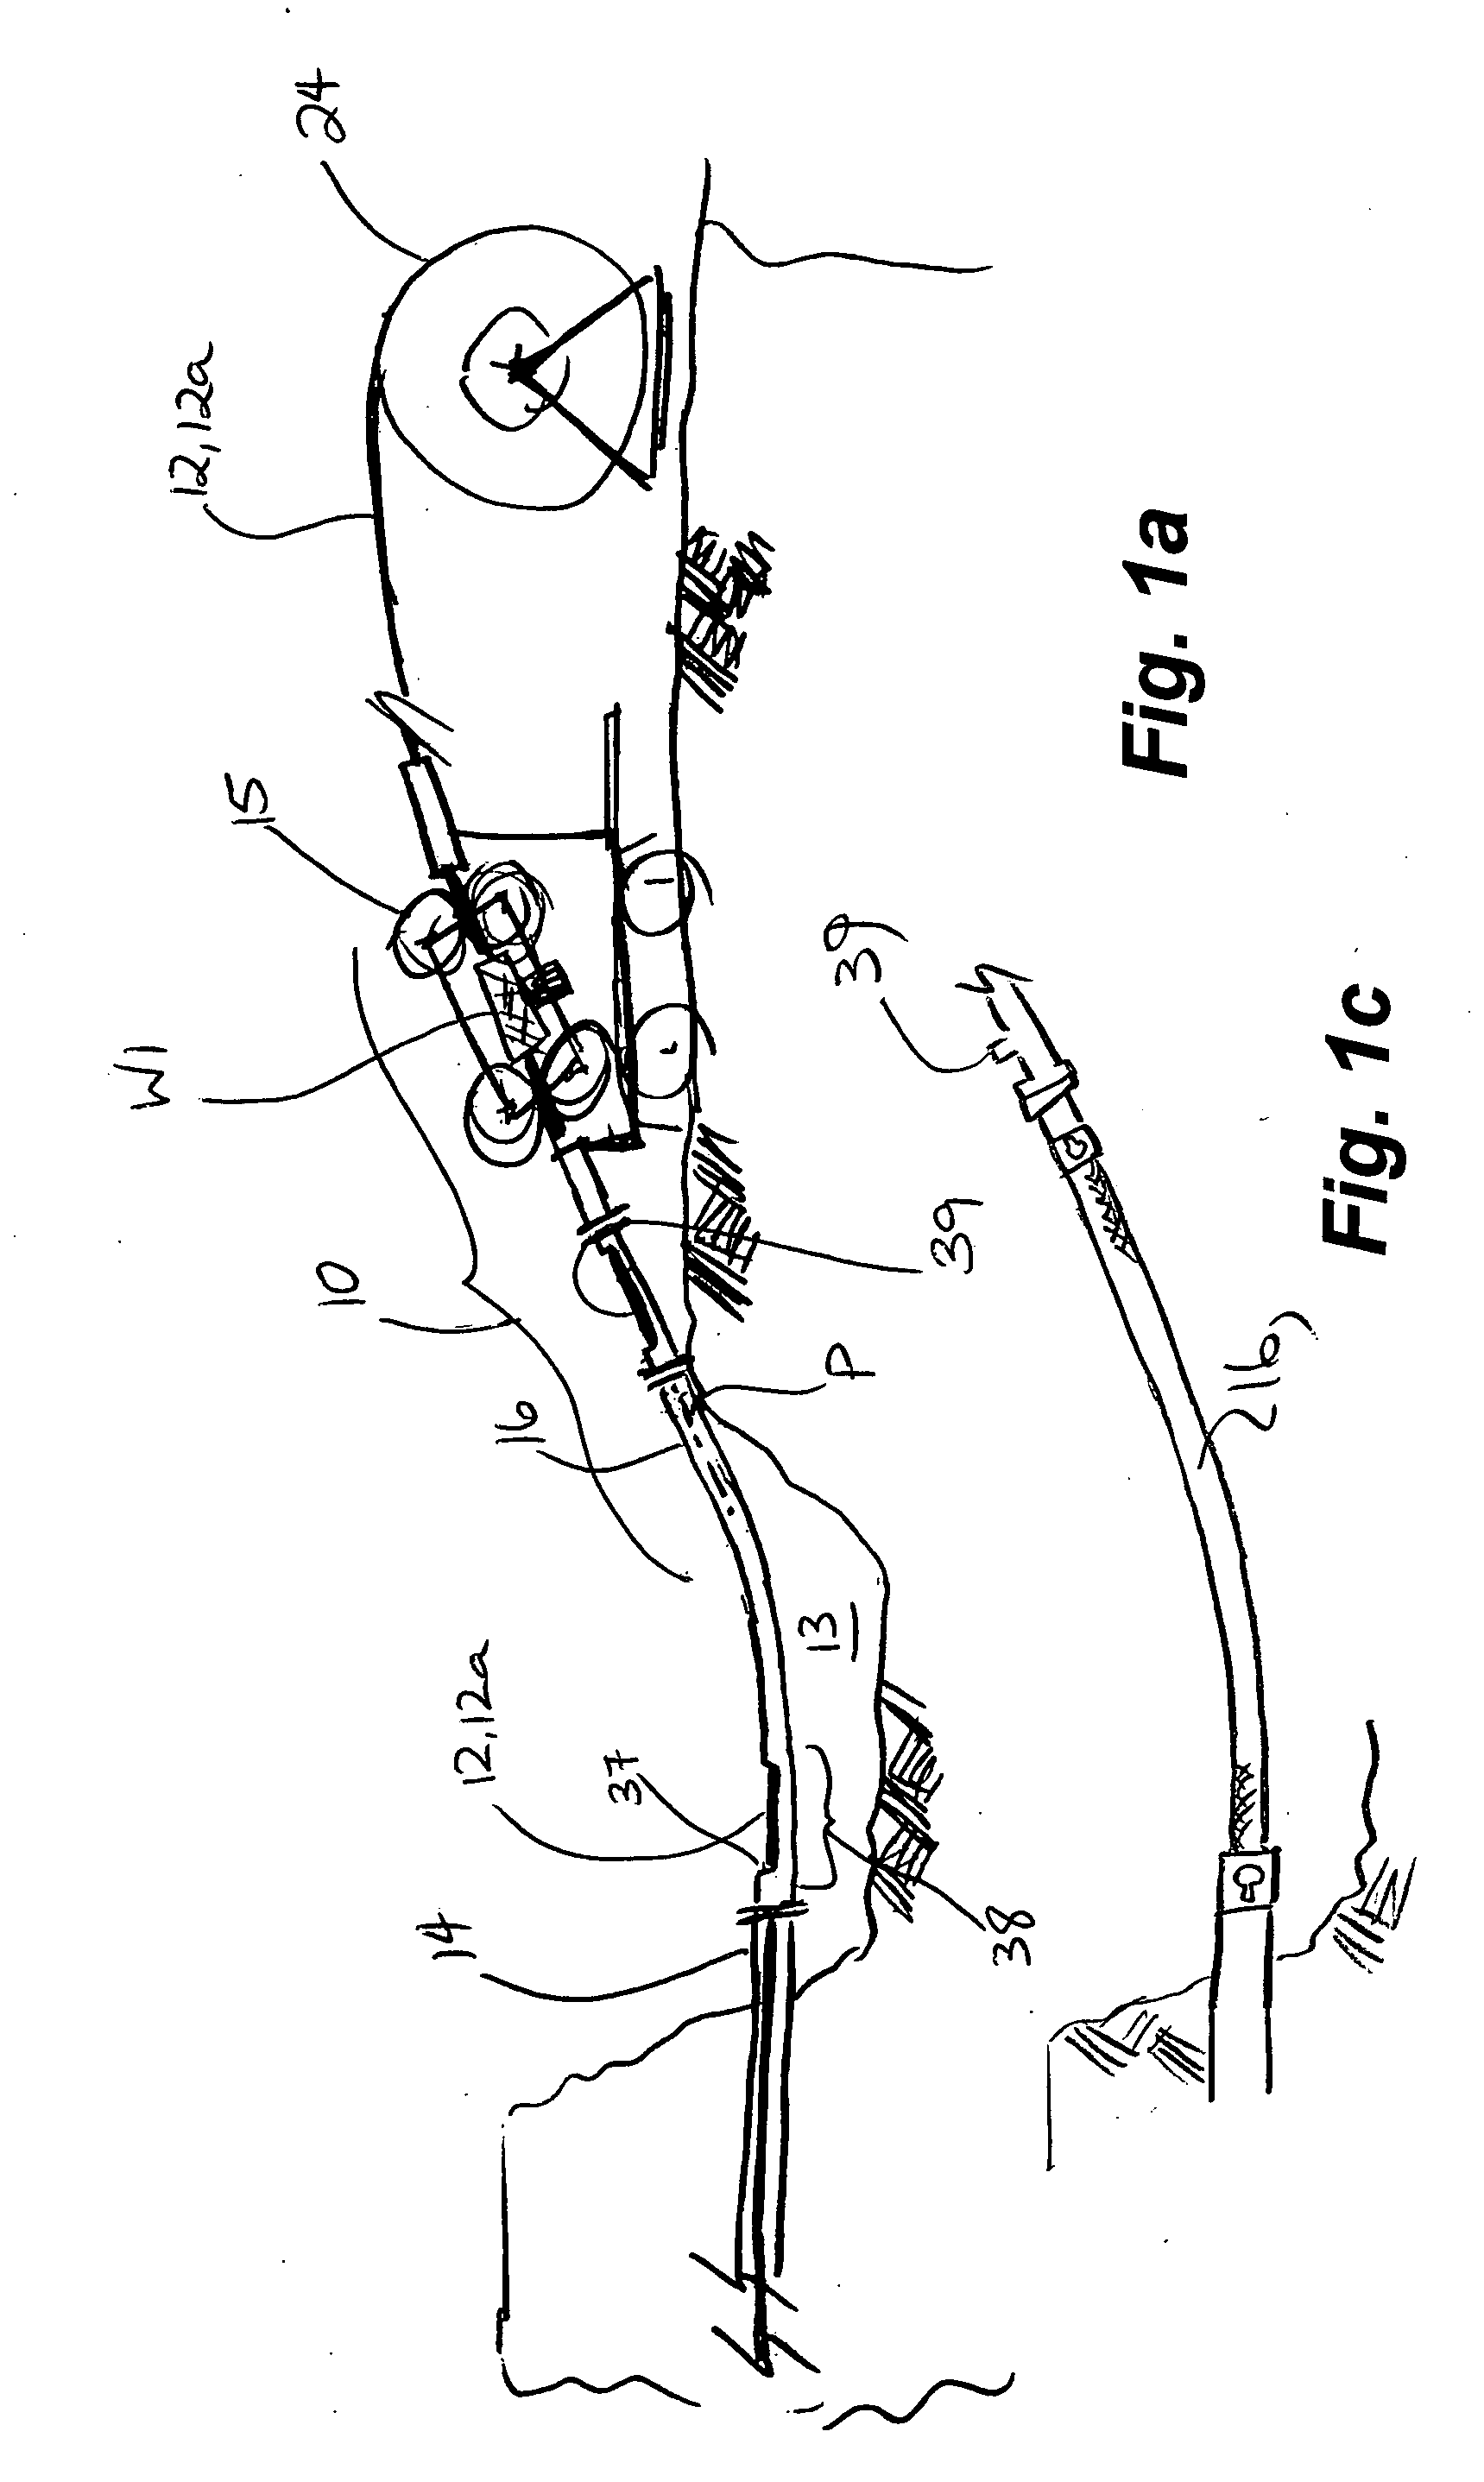 Apparatus and method for lining in situ pipe